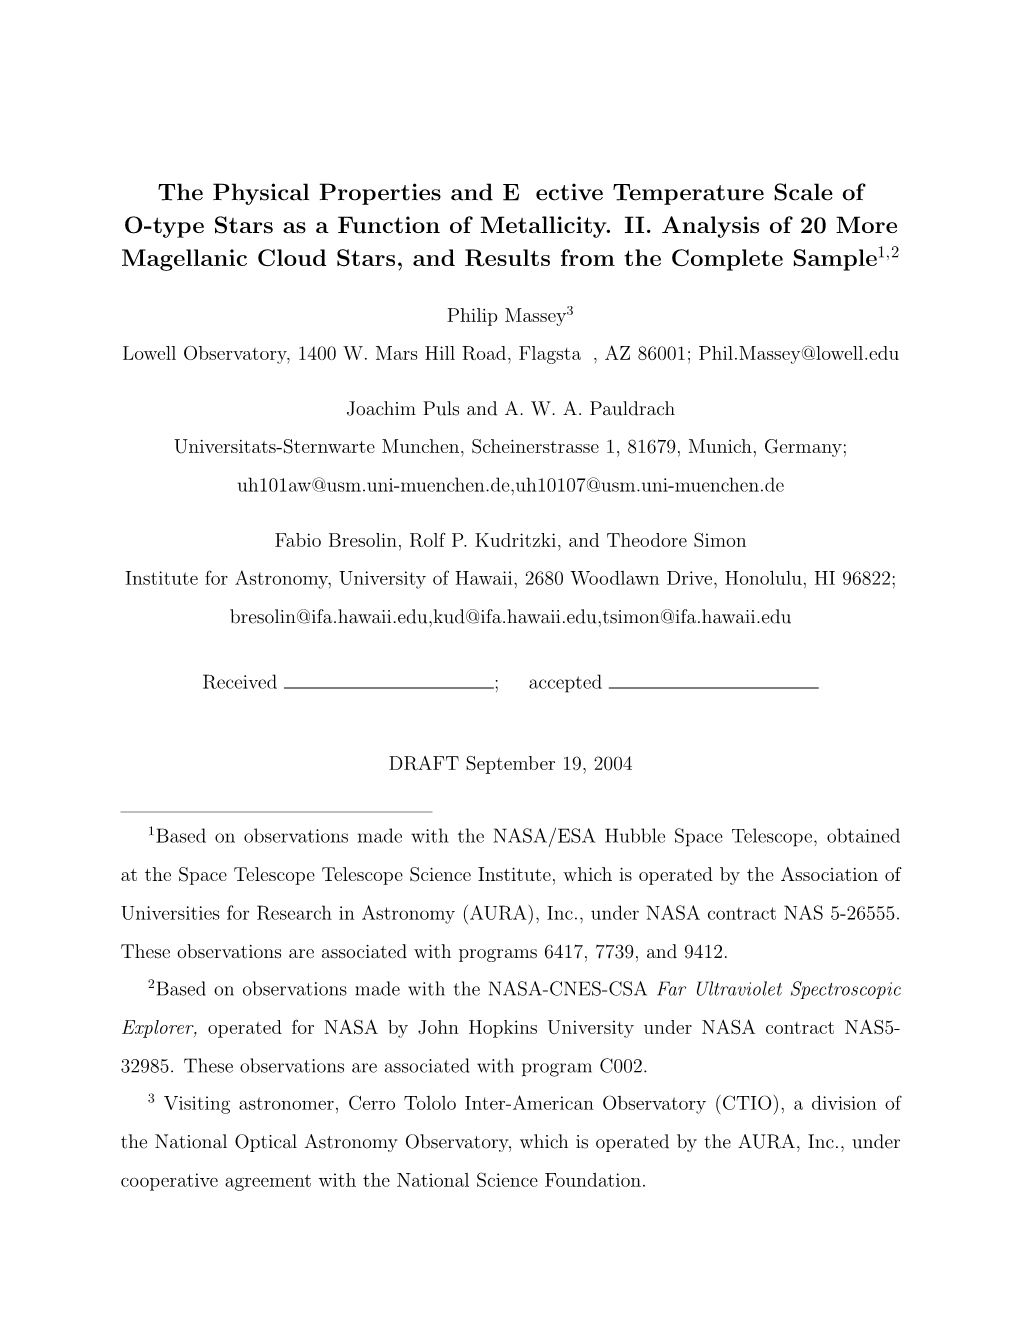 The Physical Properties and Effective Temperature Scale of O-Type Stars As a Function of Metallicity. II. Analysis of 20 More Ma